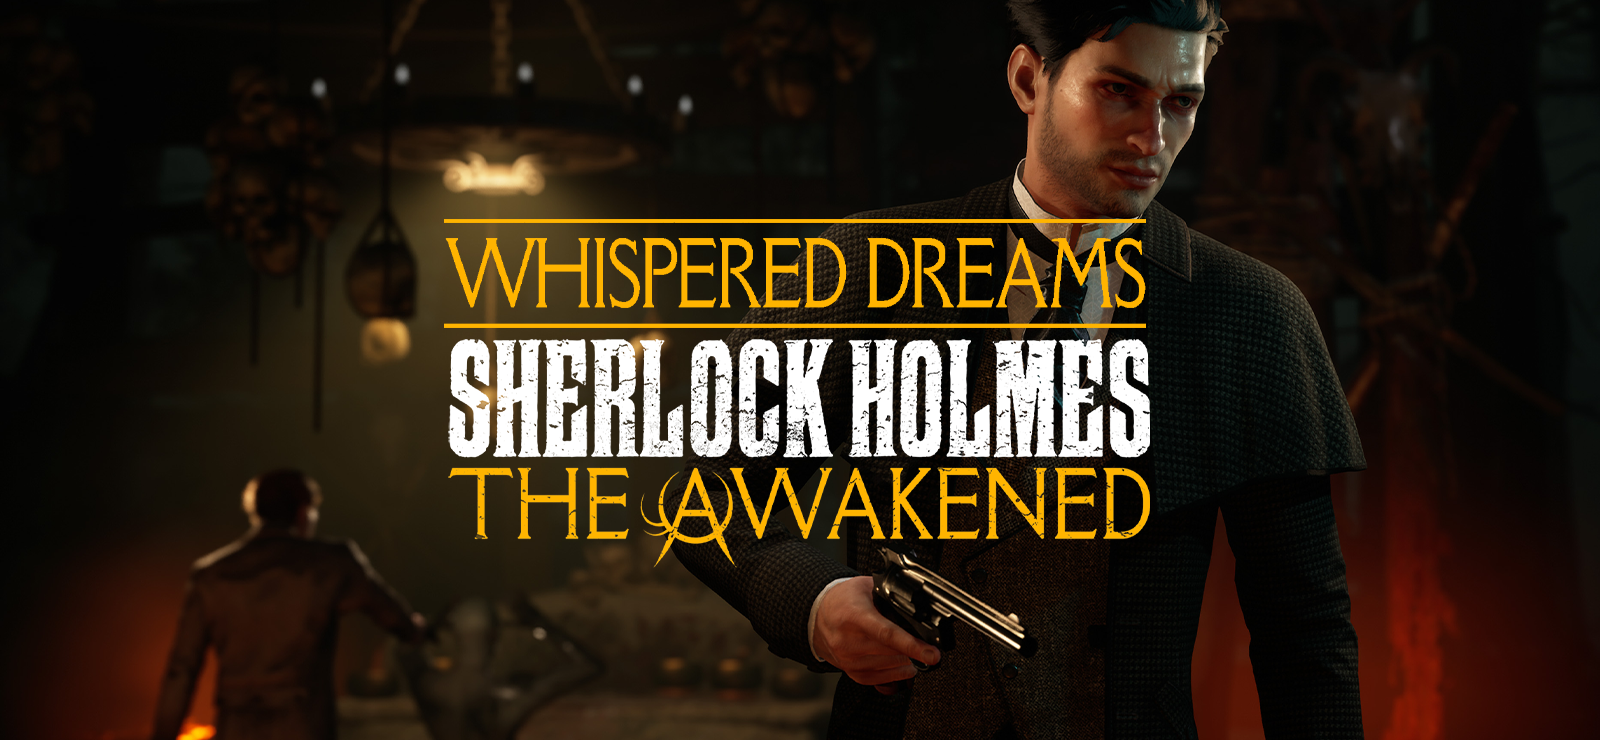 Sherlock Holmes The Awakened - Whispered Dreams Side Quest Pack